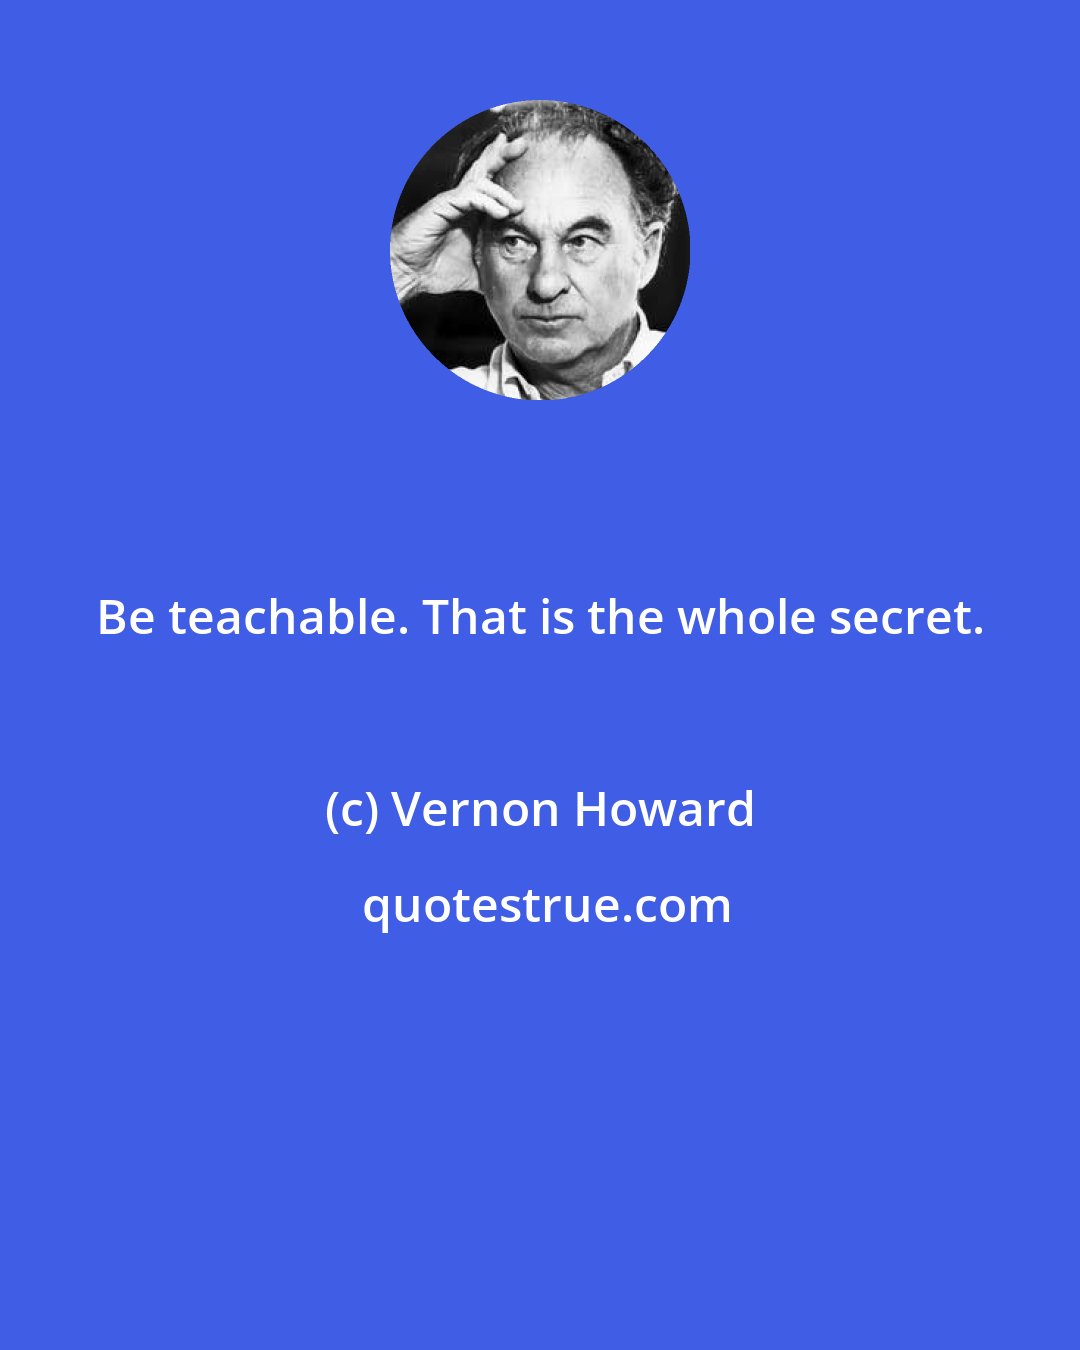 Vernon Howard: Be teachable. That is the whole secret.